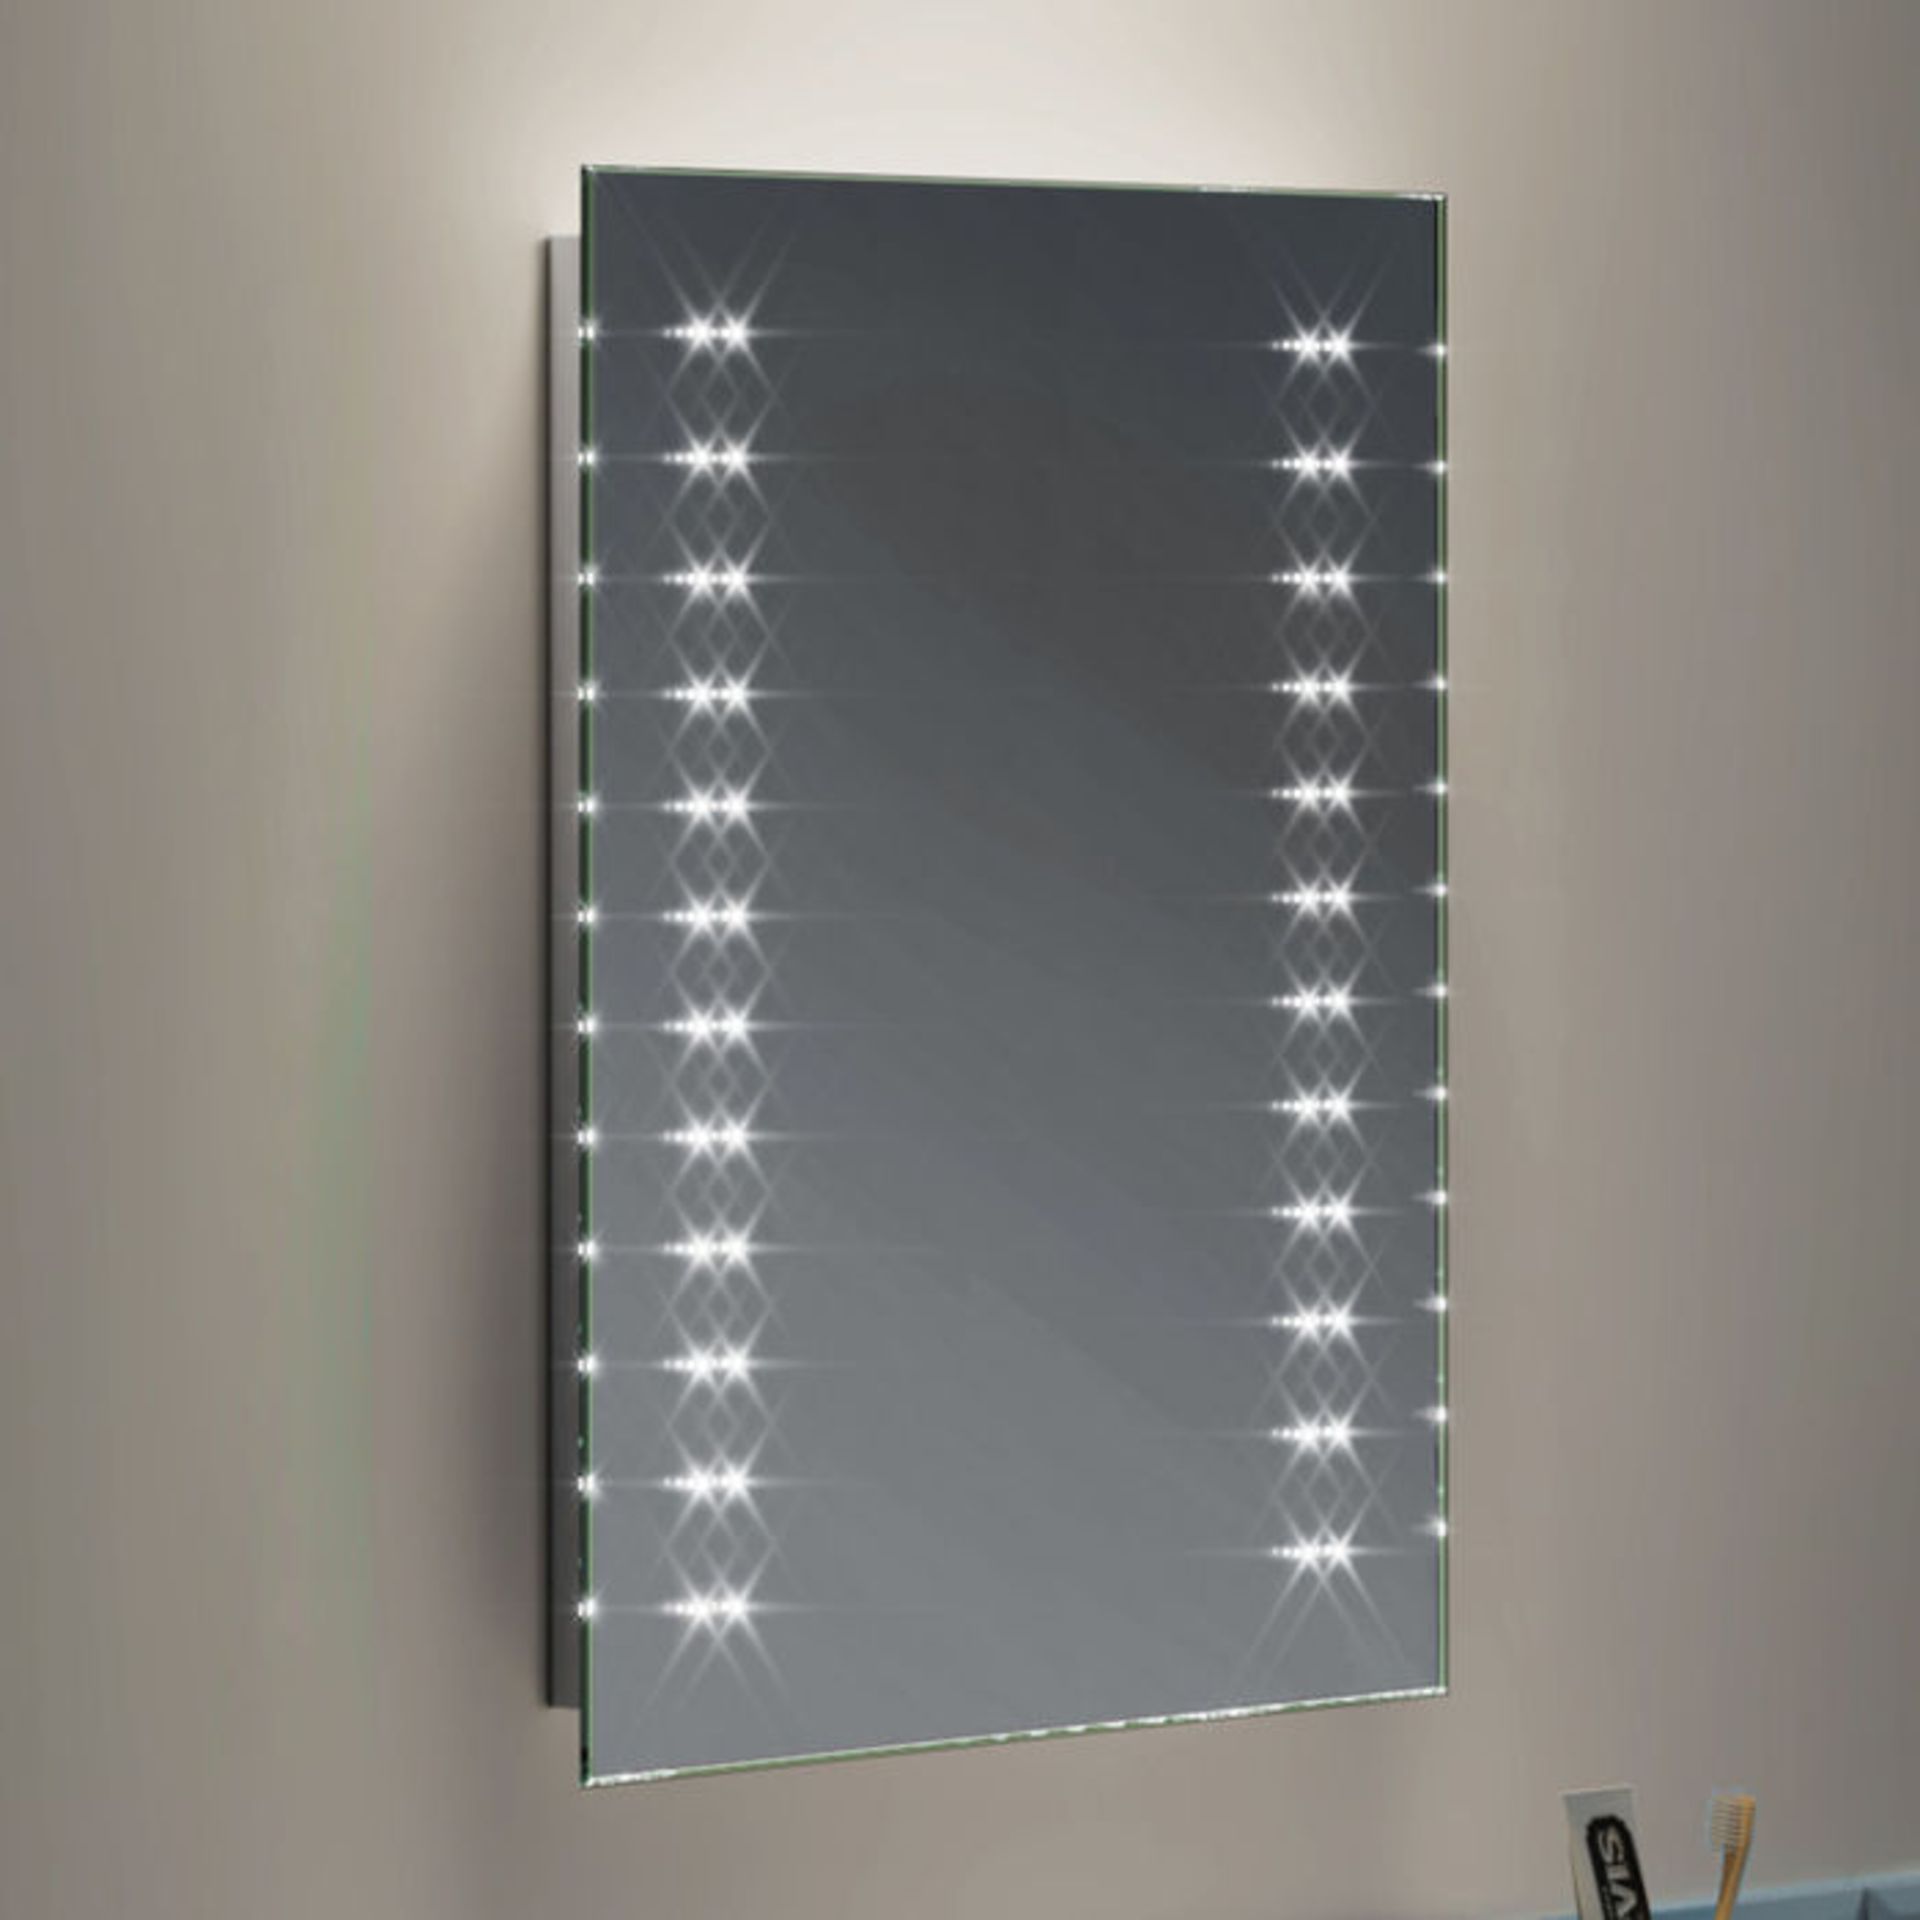 (TS334) 390x500mm Galactic Illuminated LED Mirror - Battery Operated. Energy saving controlled